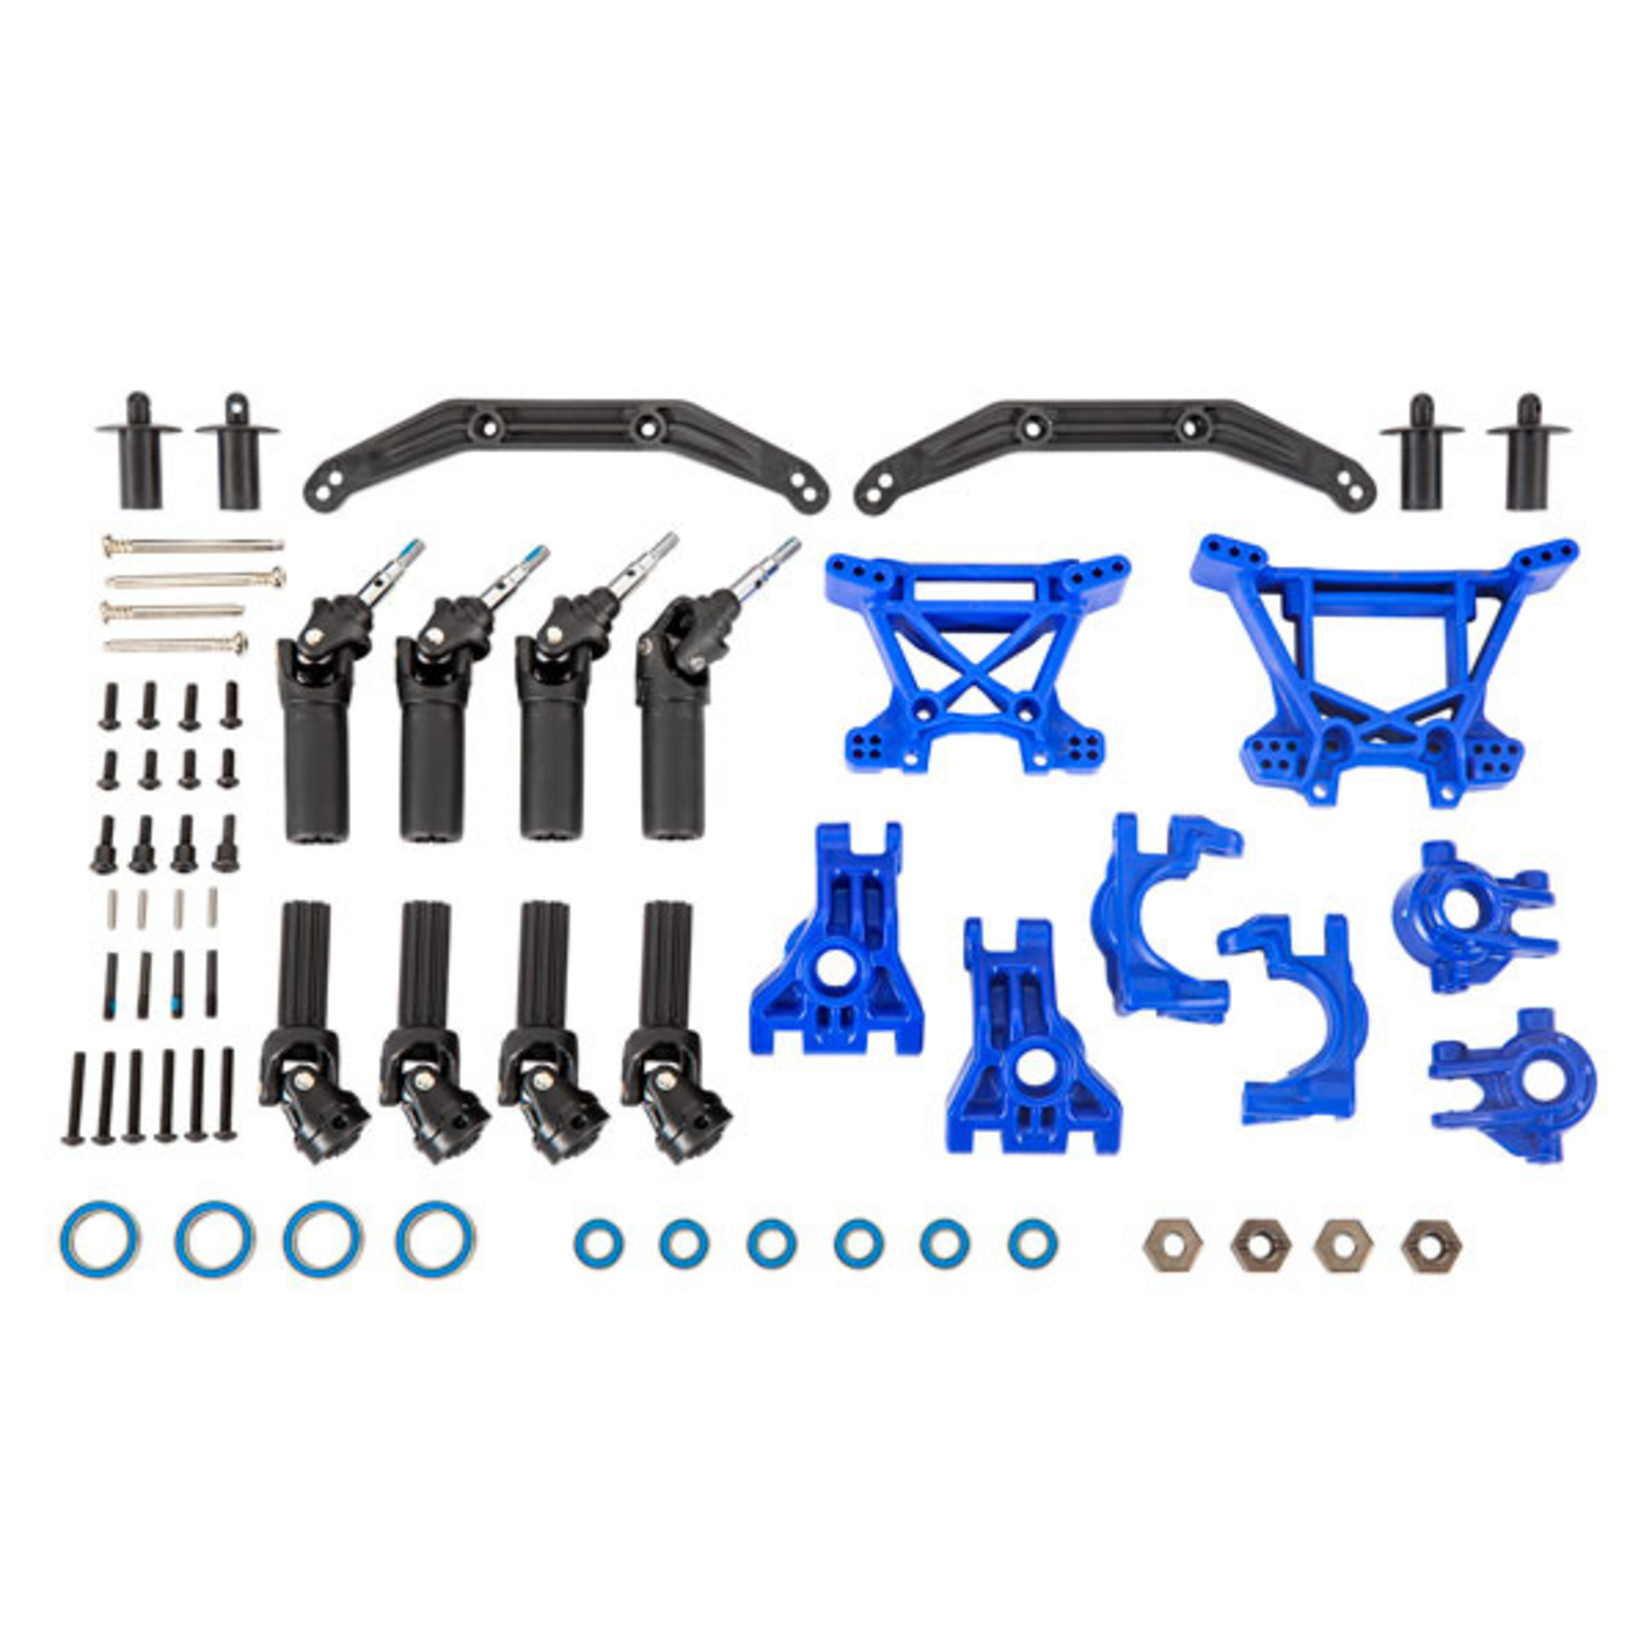 Traxxas 9080X - Outer Driveline & Suspension Upgrade Kit,